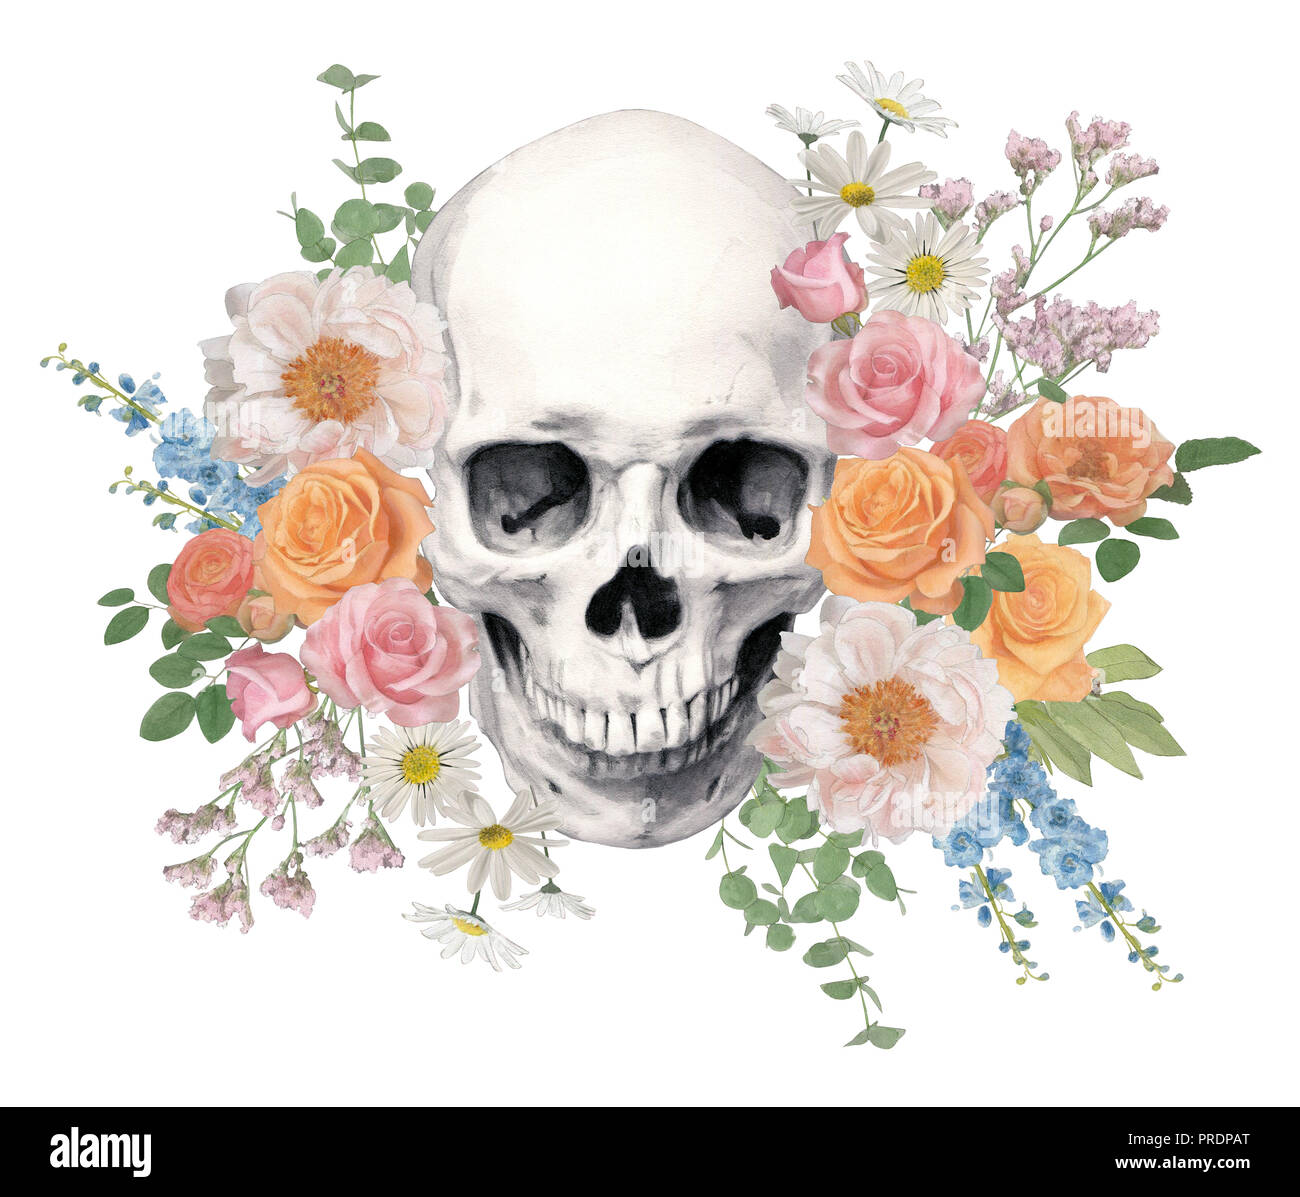 Human skull surrounded with fresh flowers Stock Photo